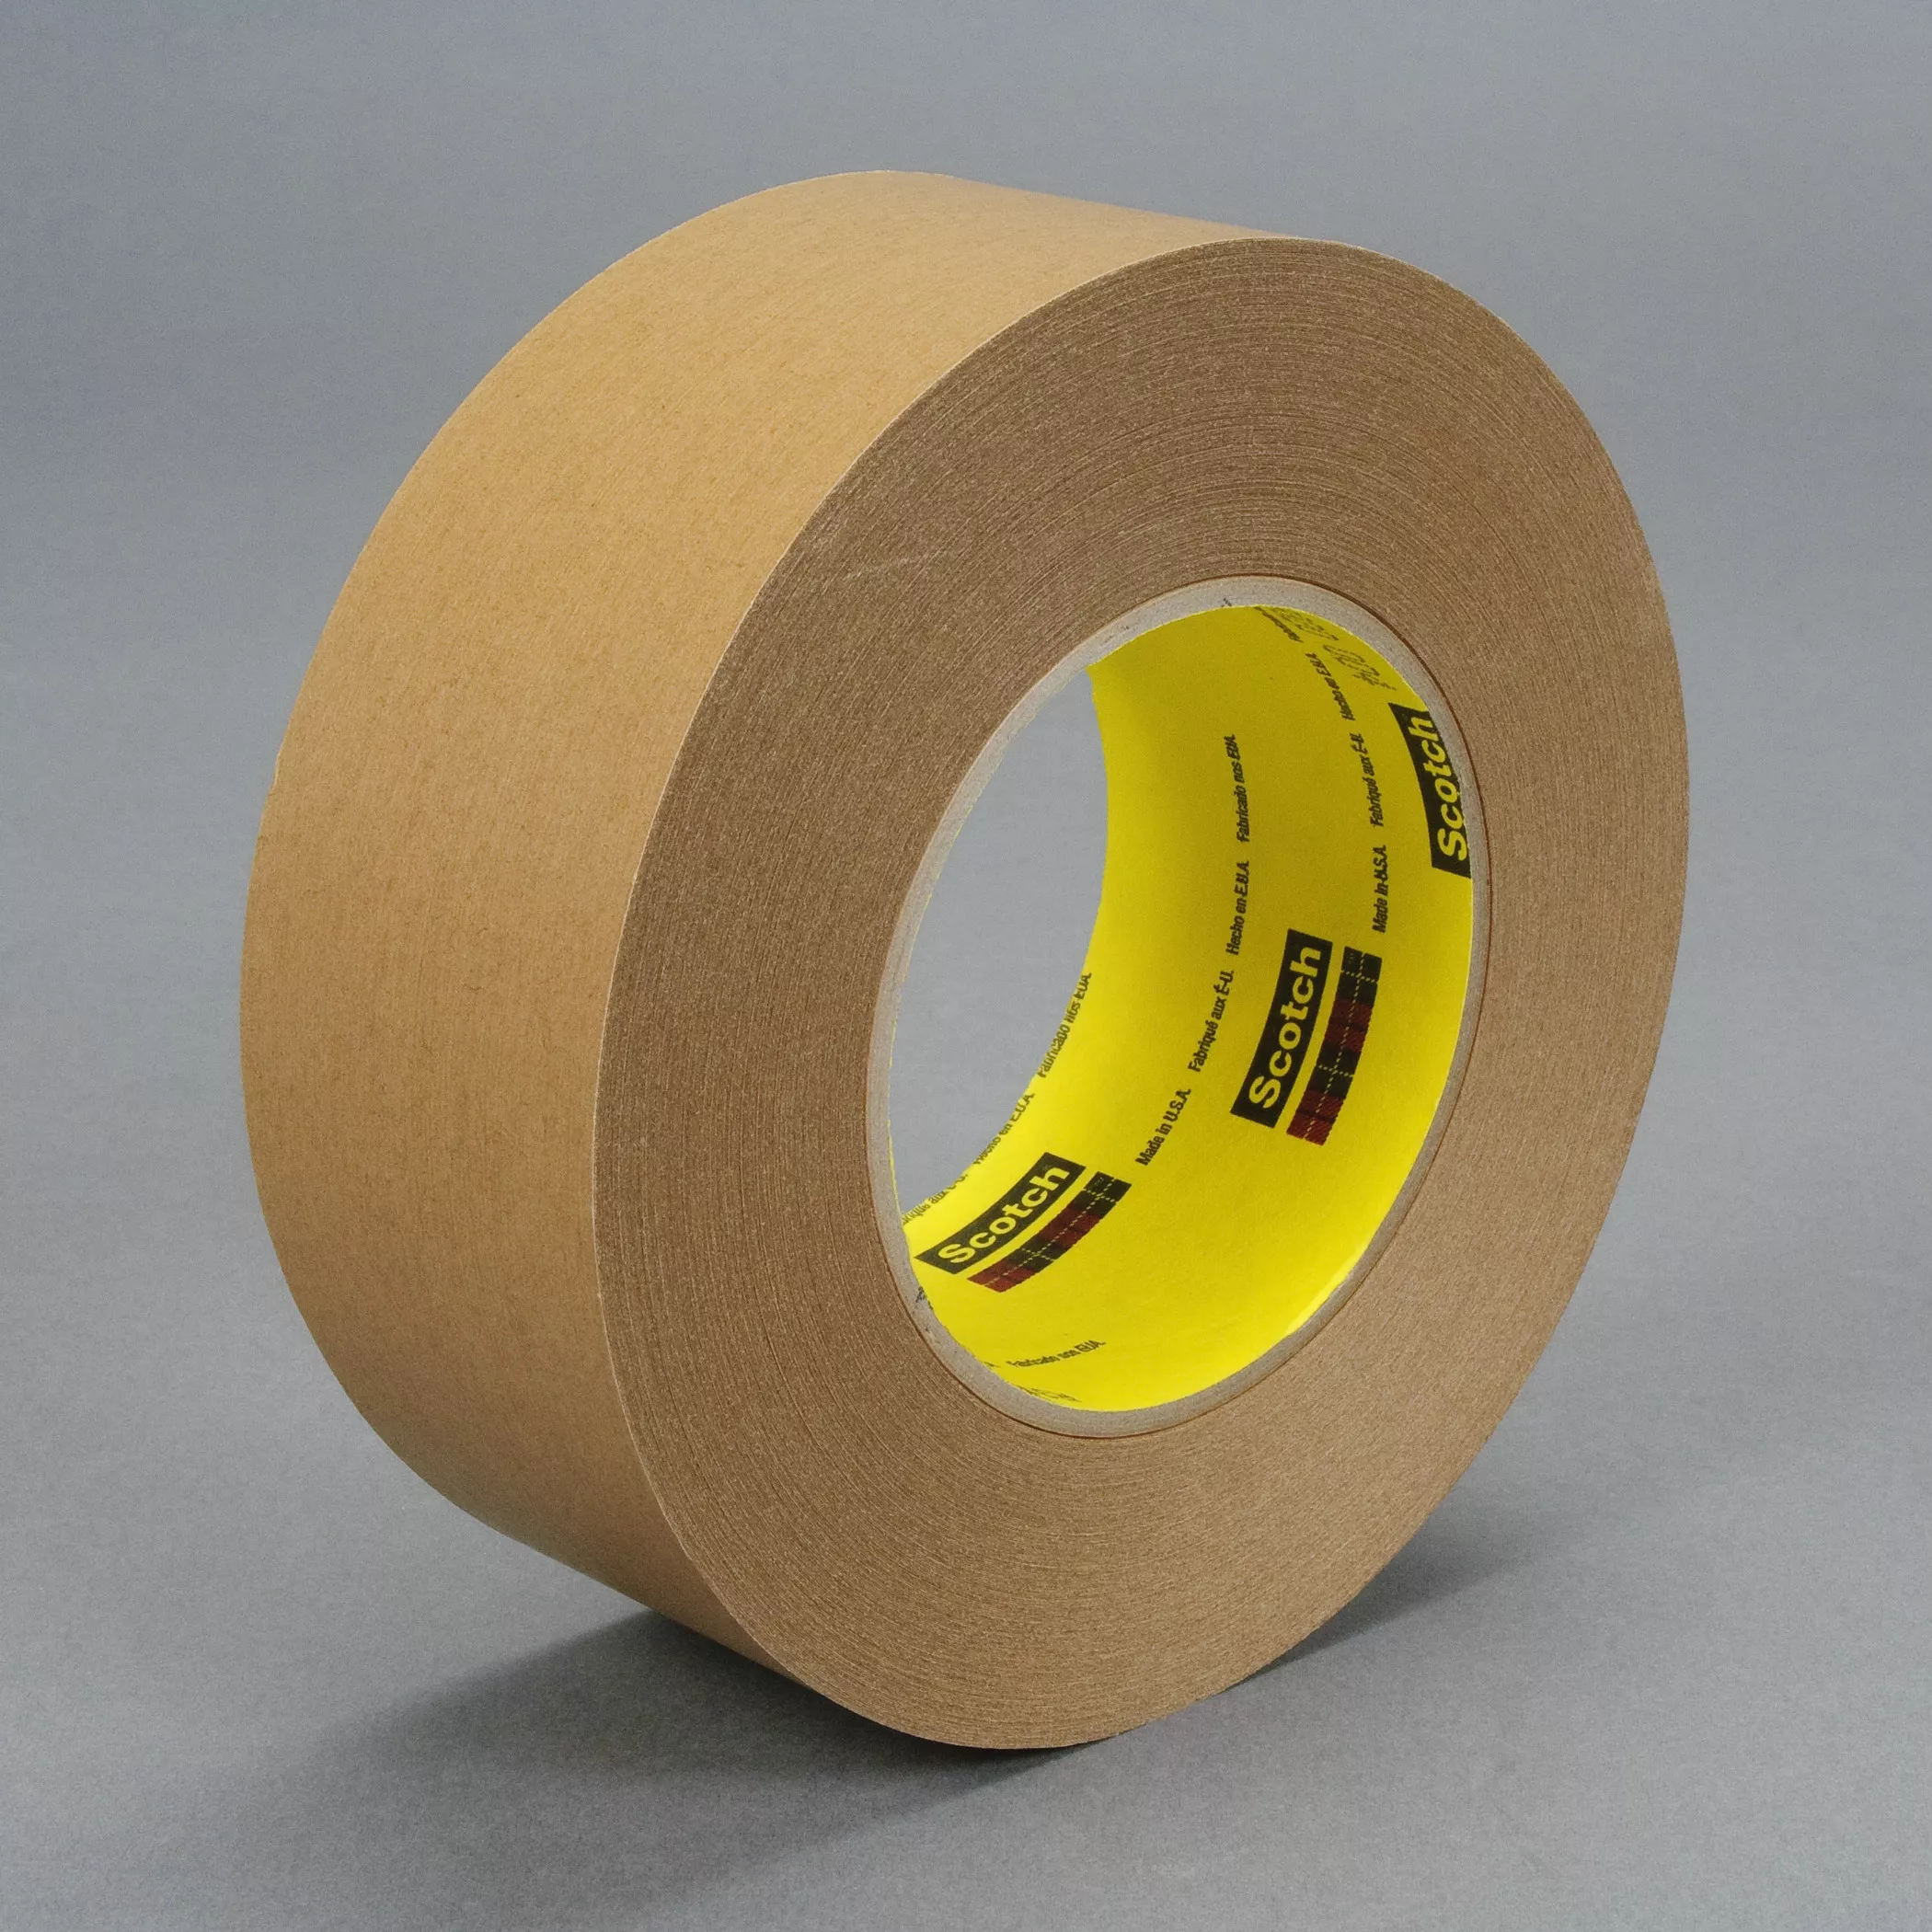 3M™ Repulpable Strong Single Coated Tape R3187, Kraft, 24 mm x 55 m,
7.5
mil, 36 Roll/Case